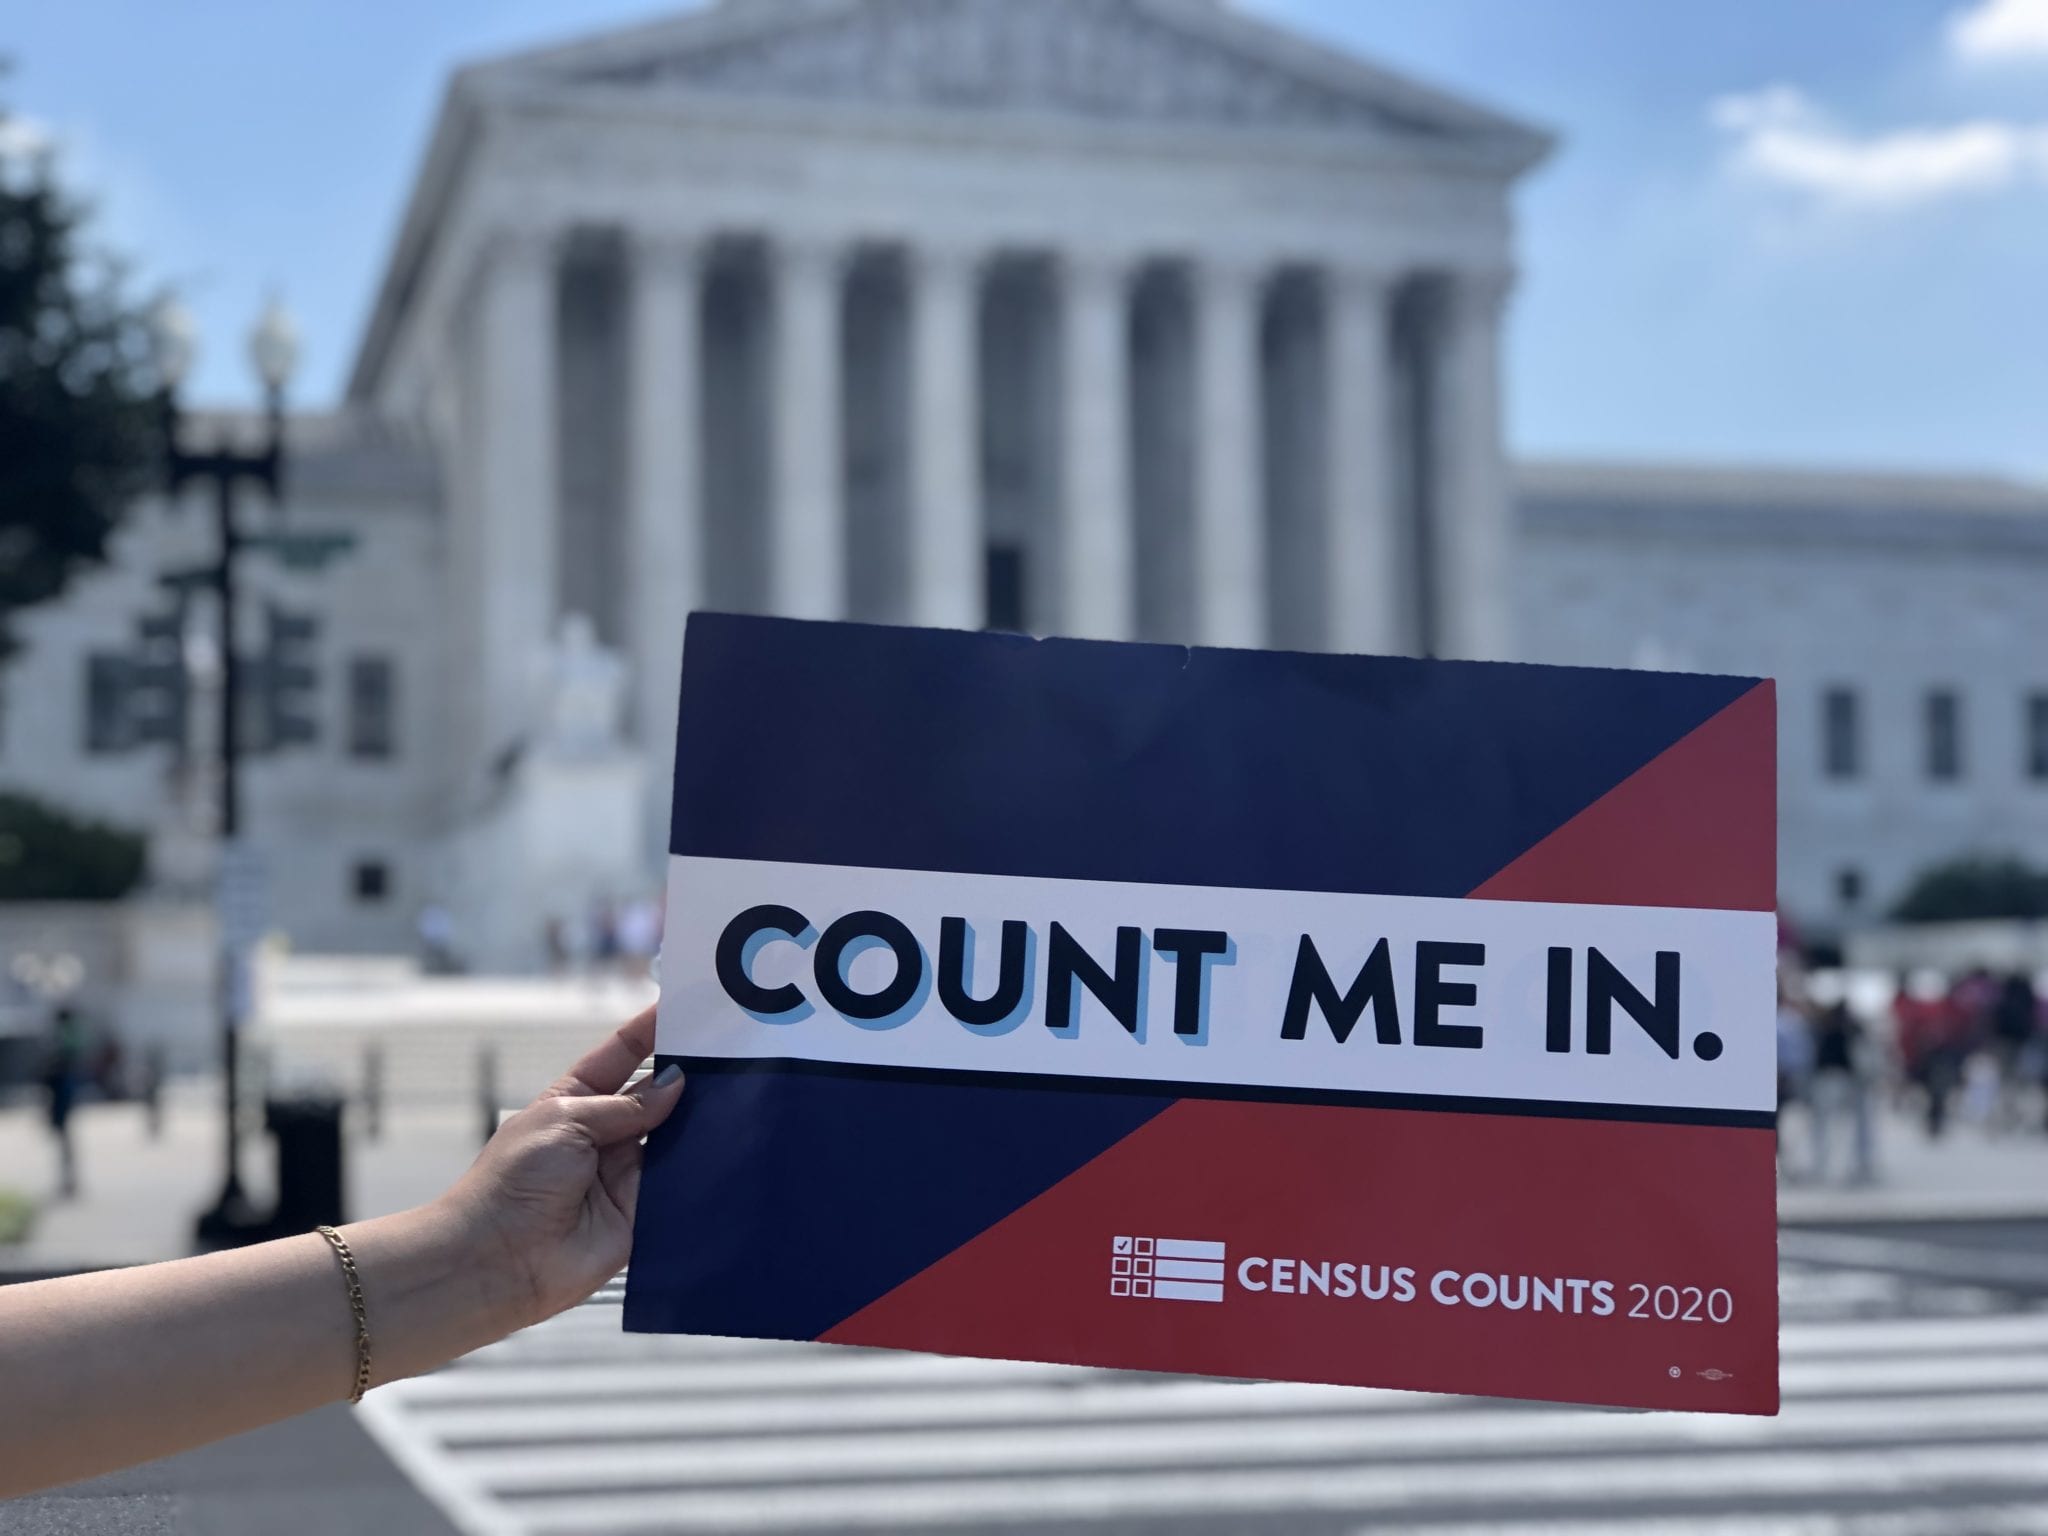 "Count me in" sign held up in front of the steps of the Supreme Court